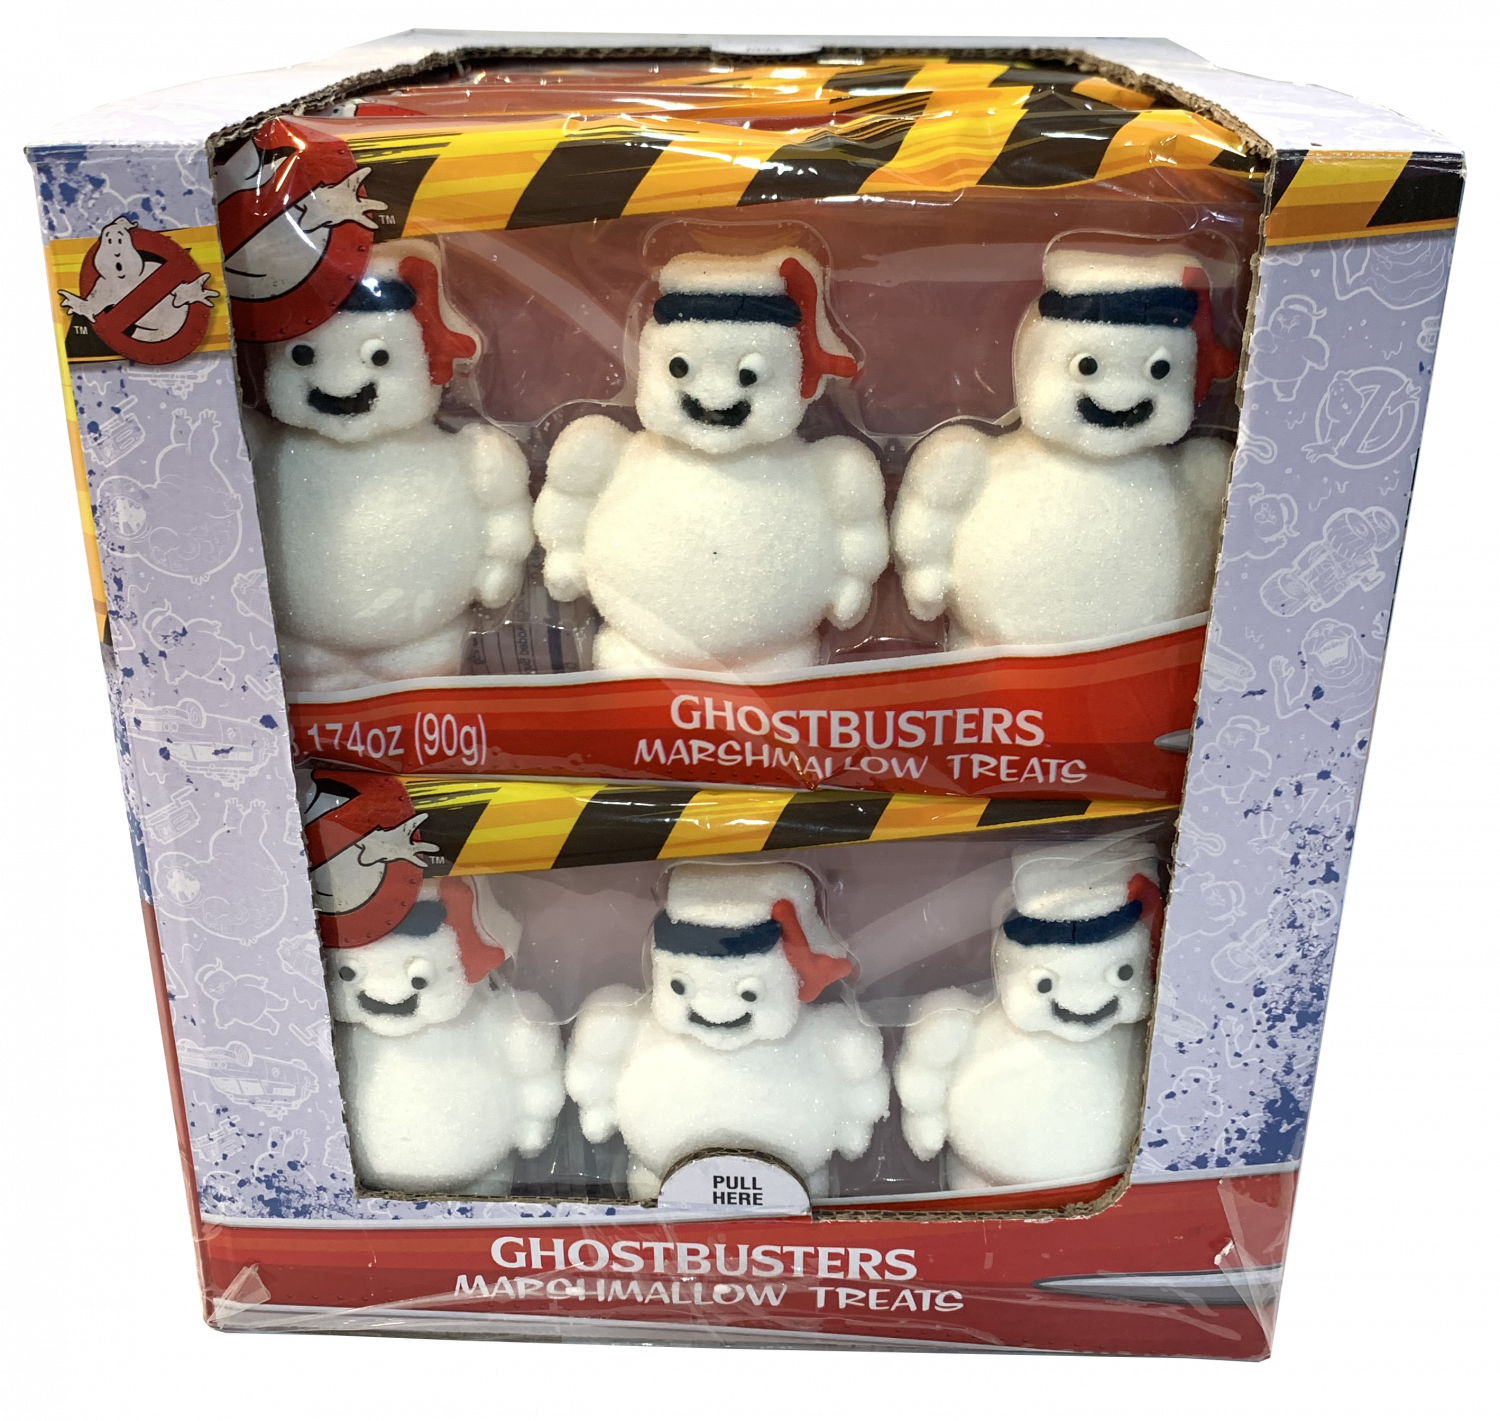 Ghostbusters Ghostbusters Deco Marshmallow 3-pack